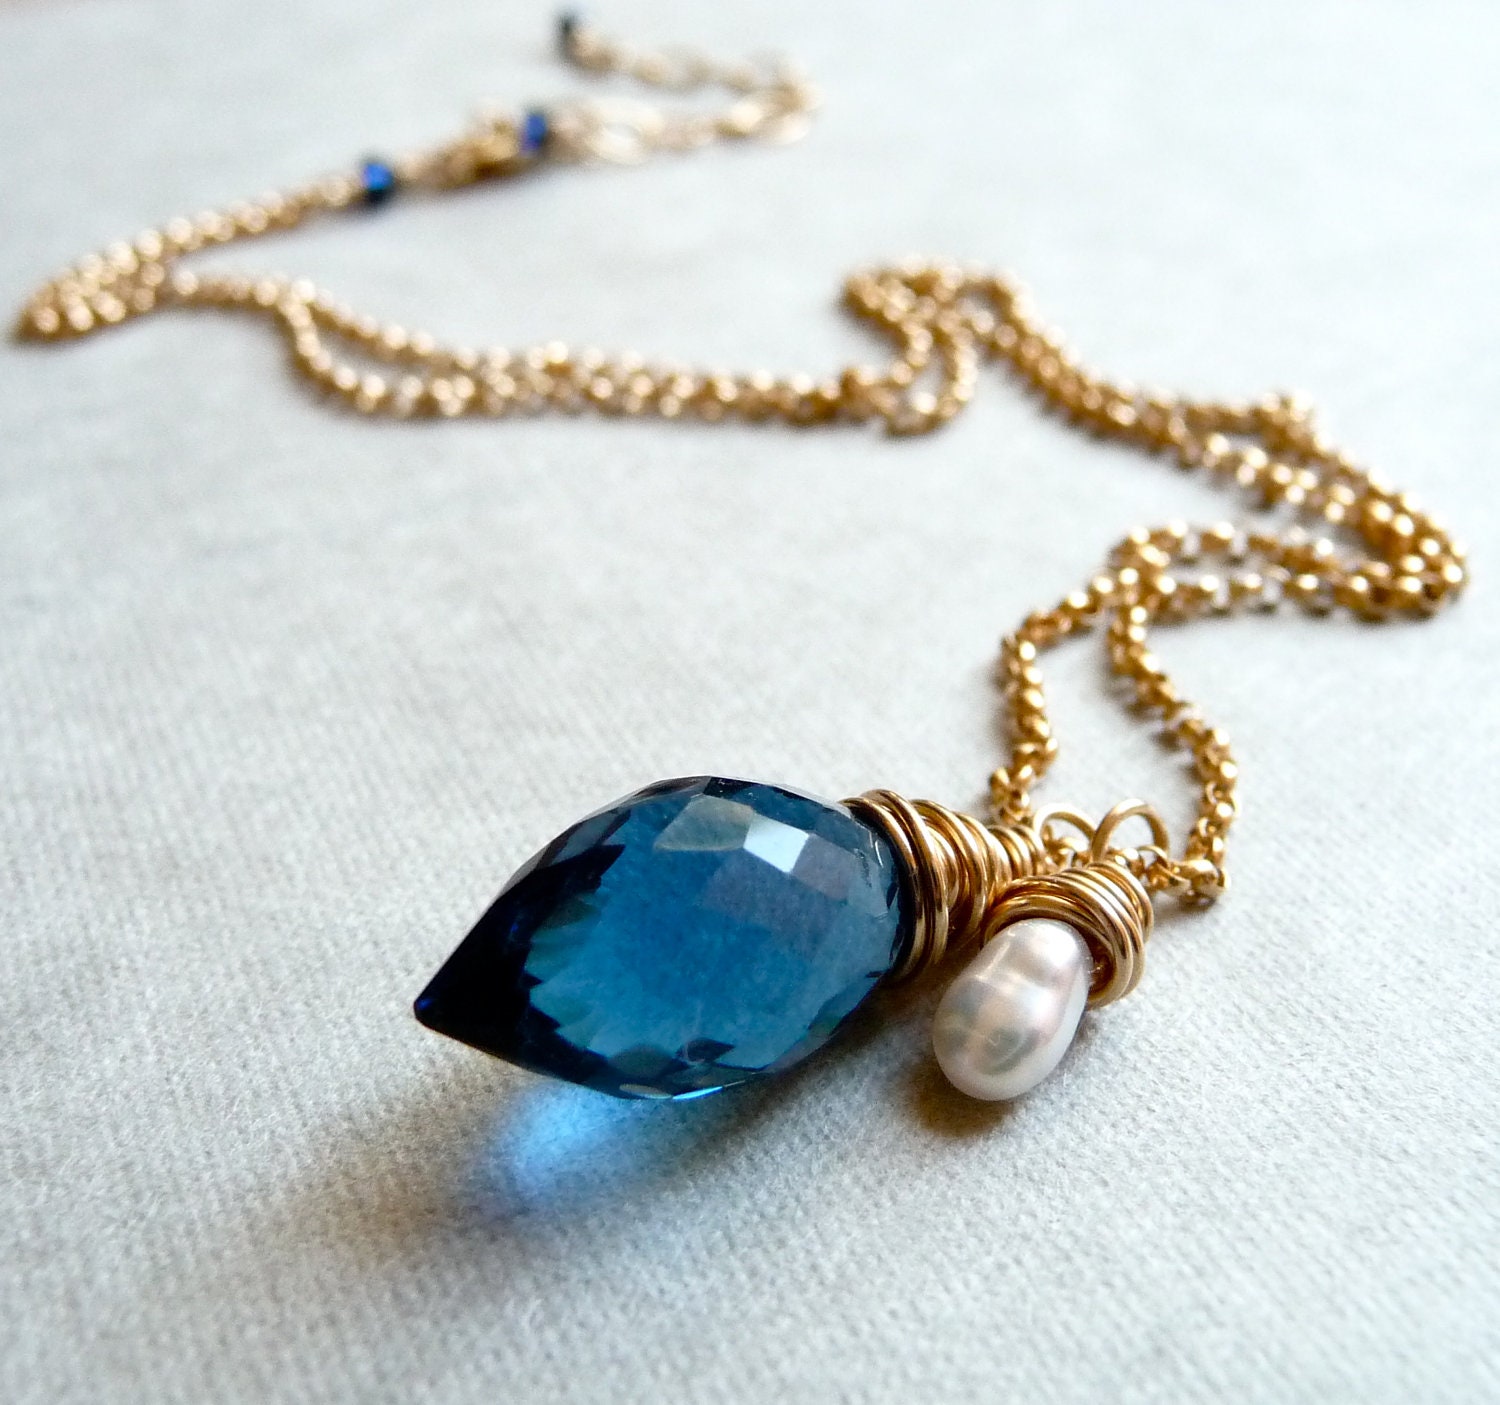 Blue Quartz Necklace, Cobalt Blue Quartz and Freshwater Pearl Necklace, Gold Filled Chain Necklace, Holiday Jewelry - karinagracejewelry